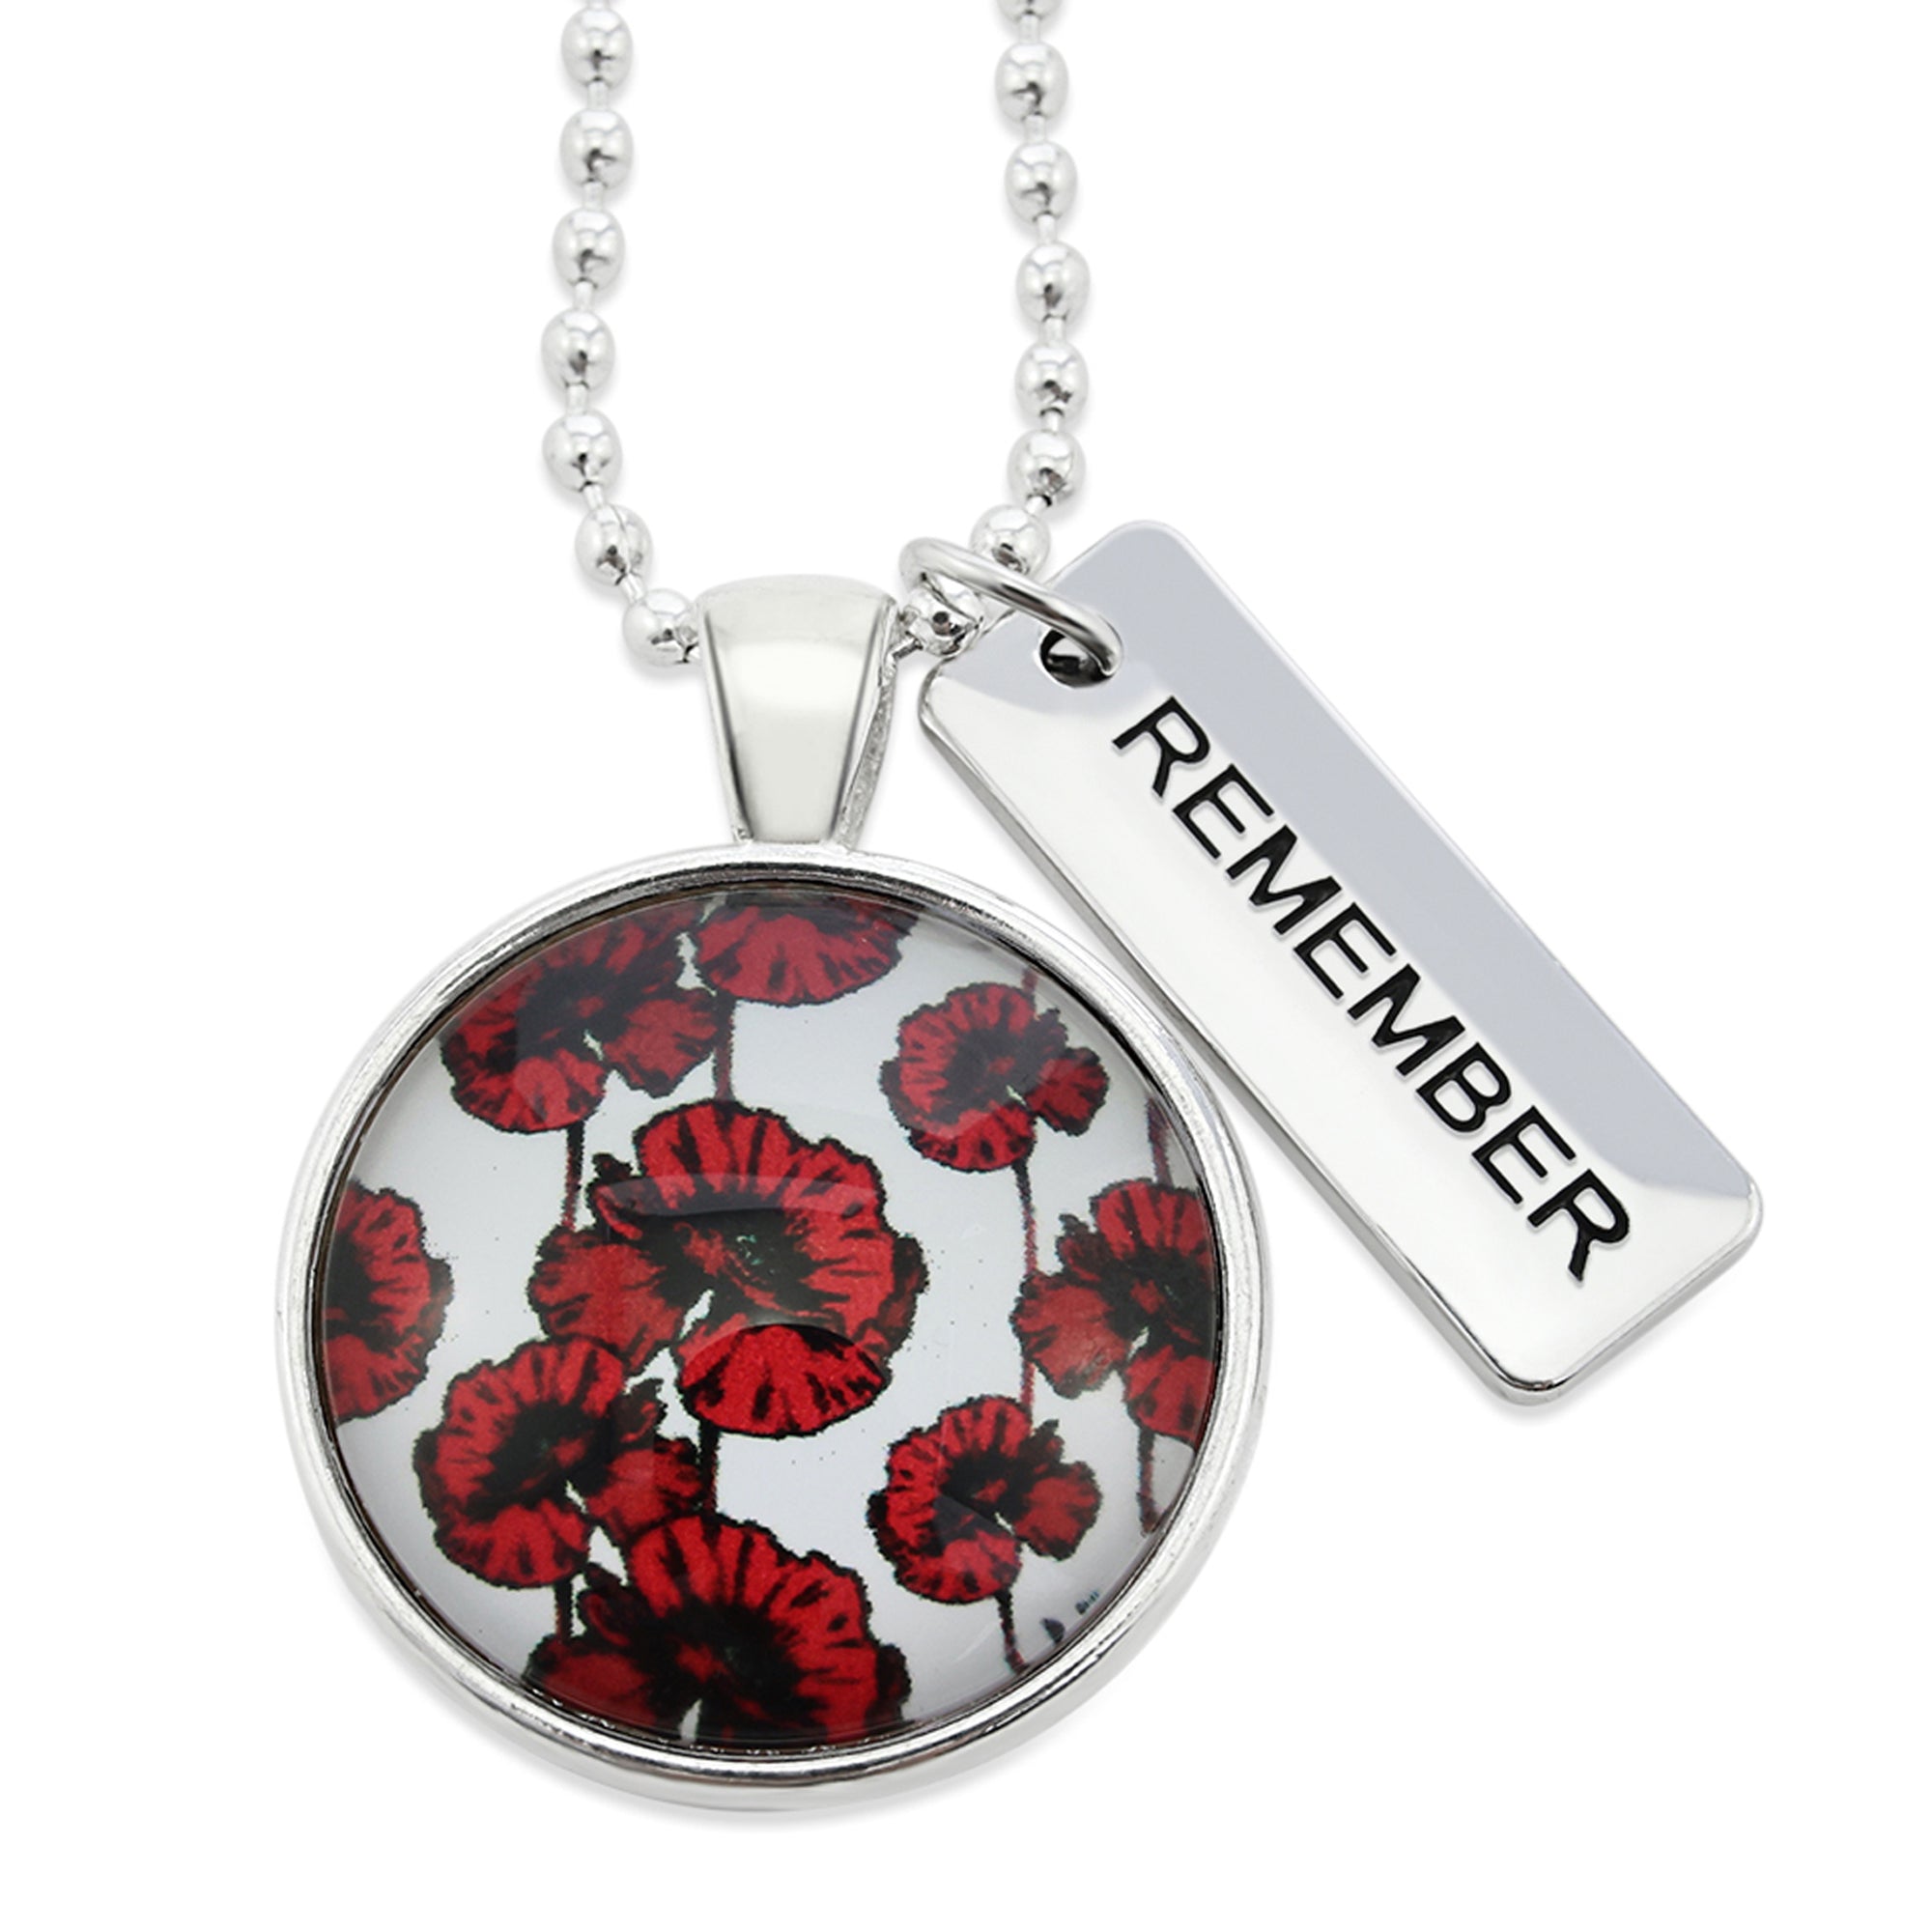 POPPIES Collection - Bright Silver 'REMEMBER' Necklace - Peace Poppy (10221)